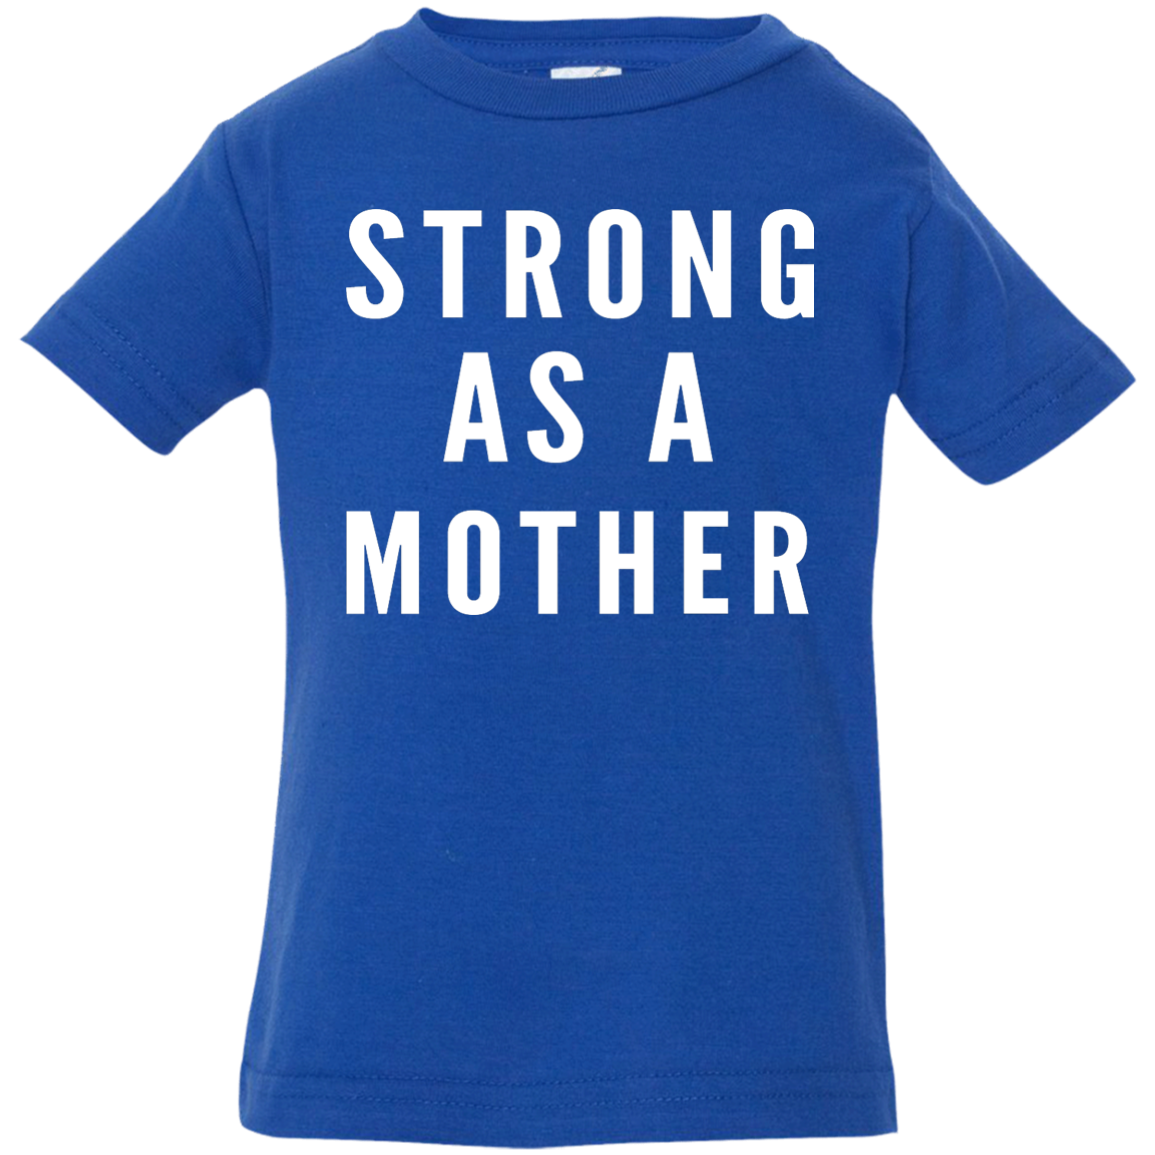 Strong As A Mother Shirt For Kids